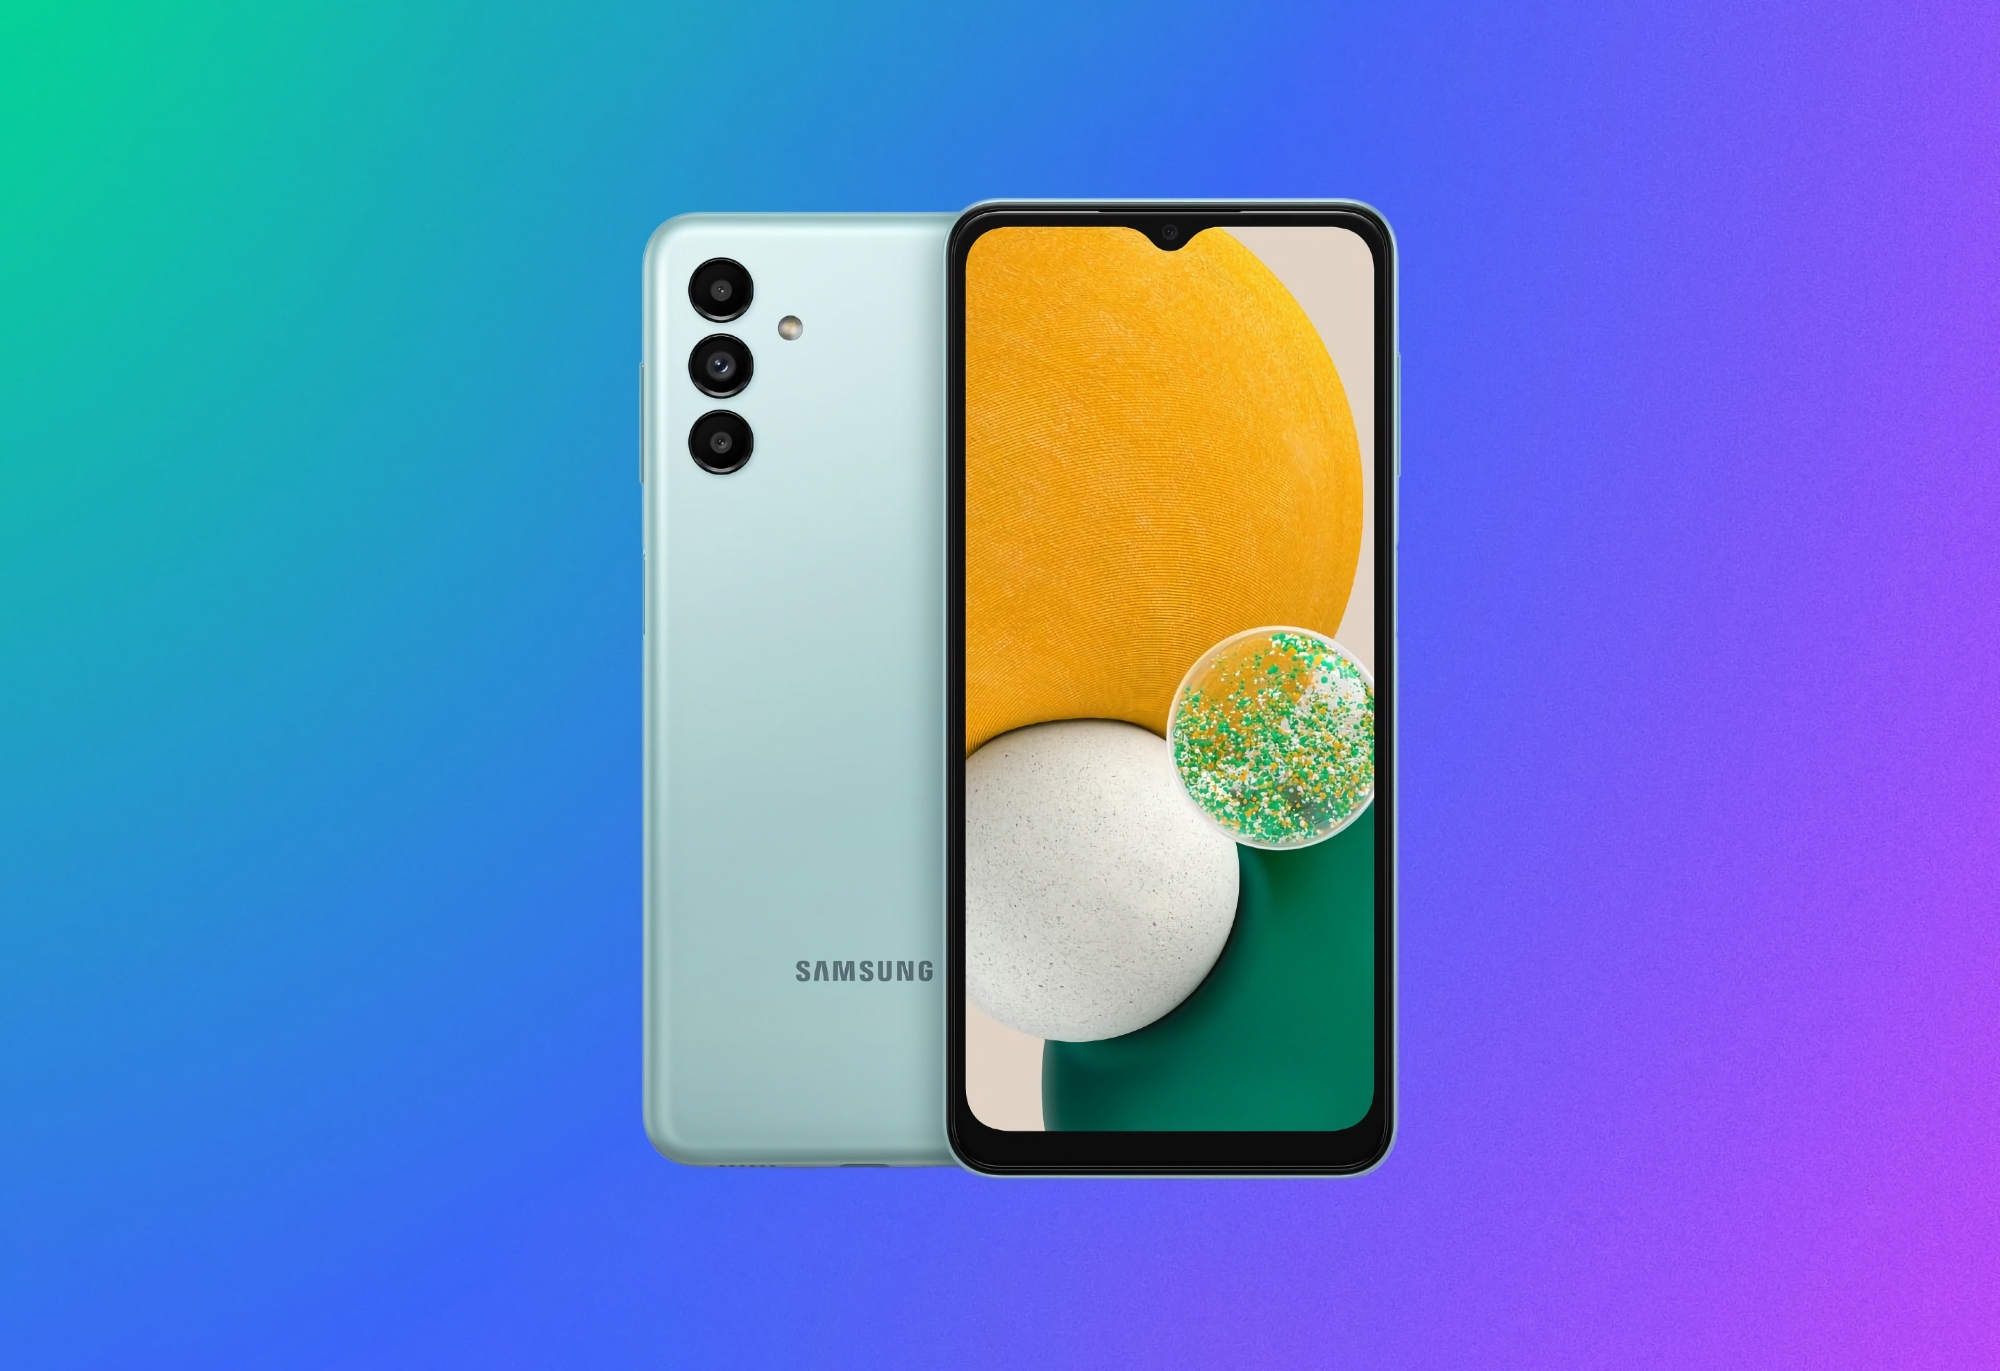 MediaTek version of Galaxy A13 got Android 13 with One UI 5.0